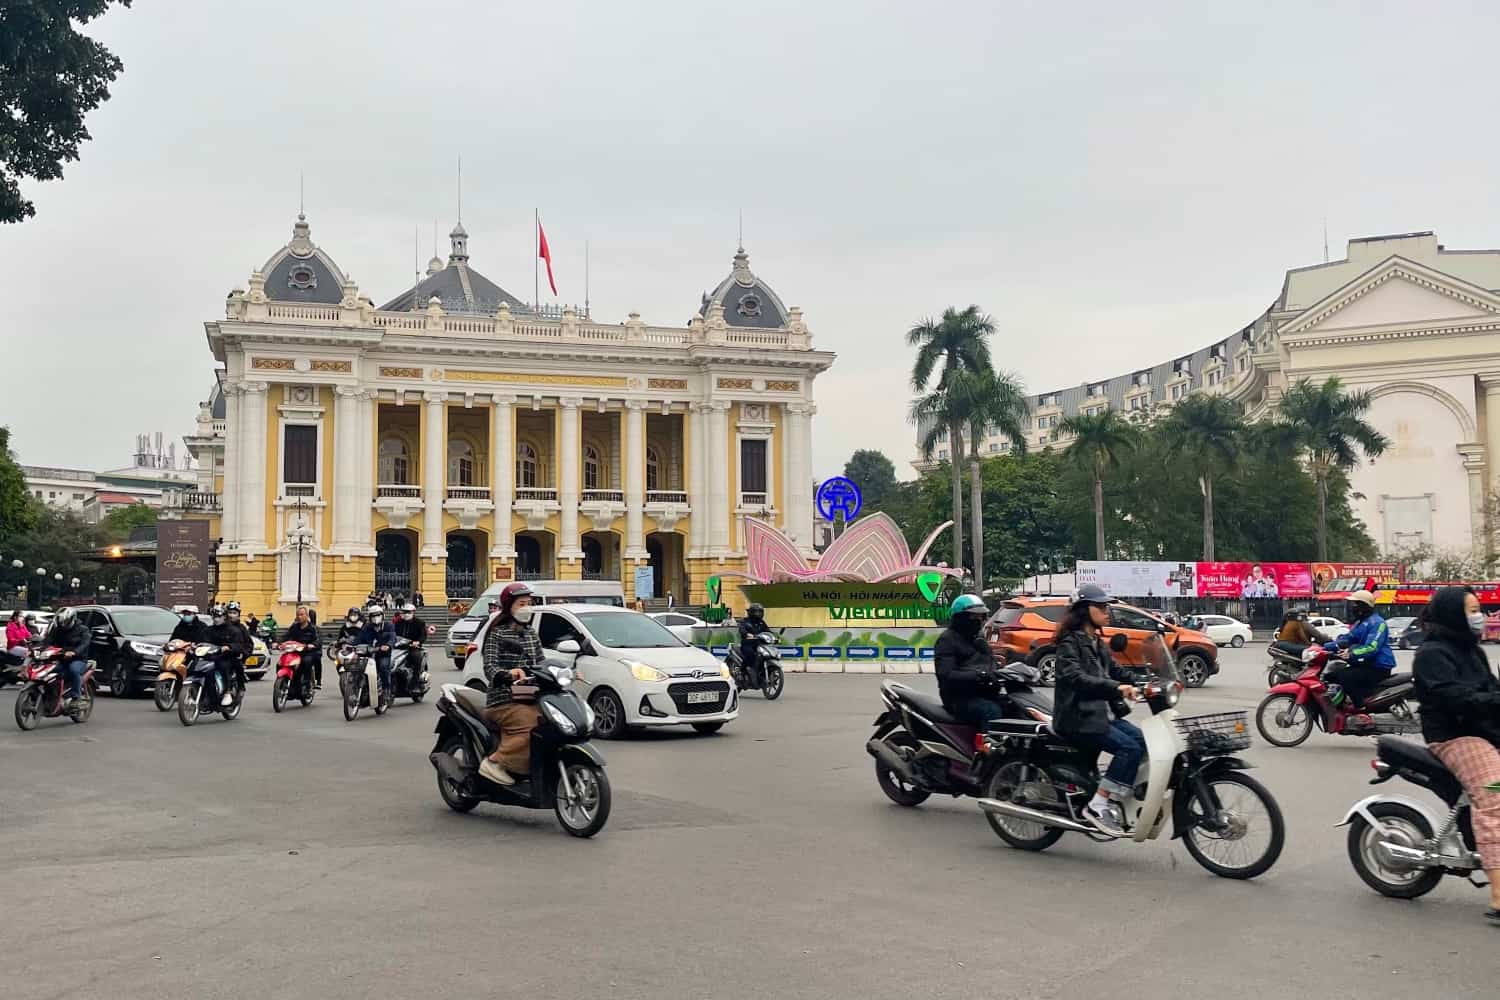 what to expect in Vietnam